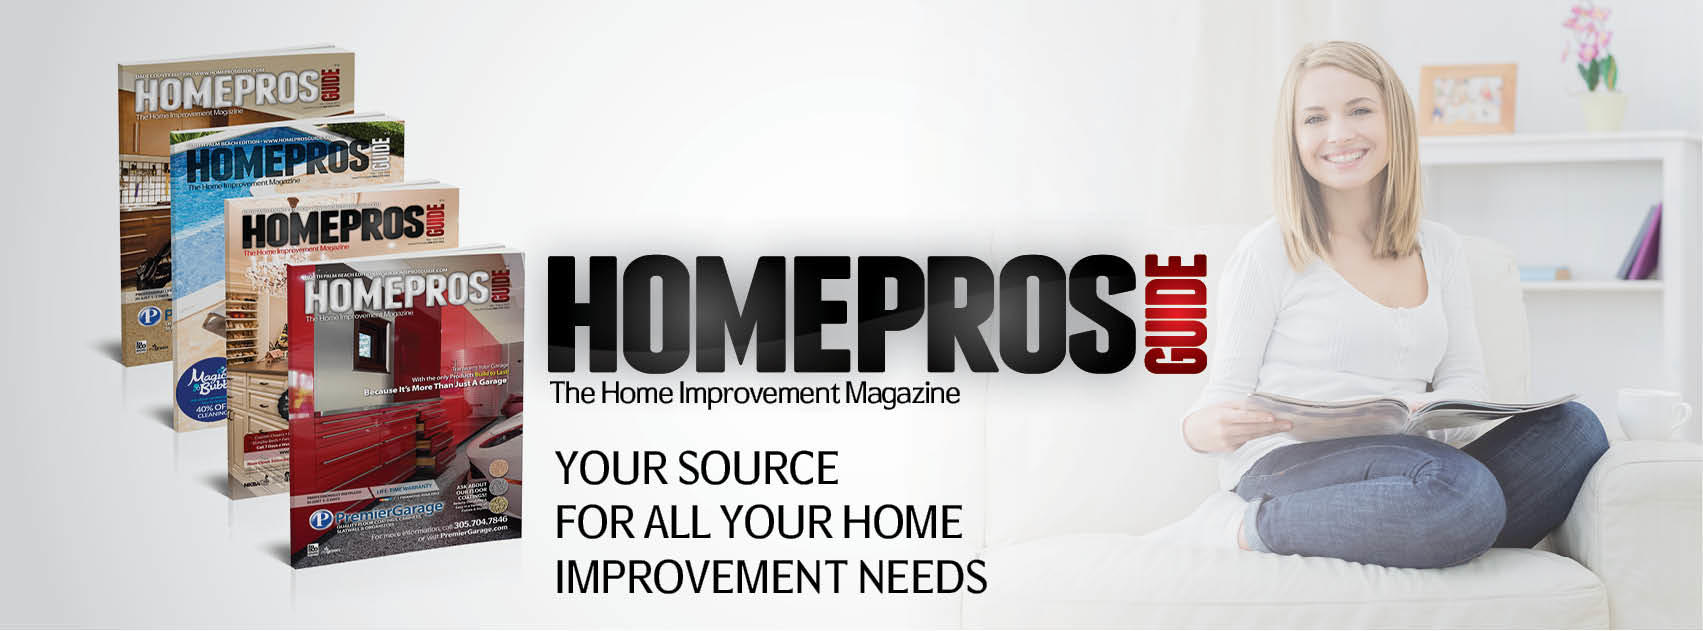 Home Pros Guide Photo